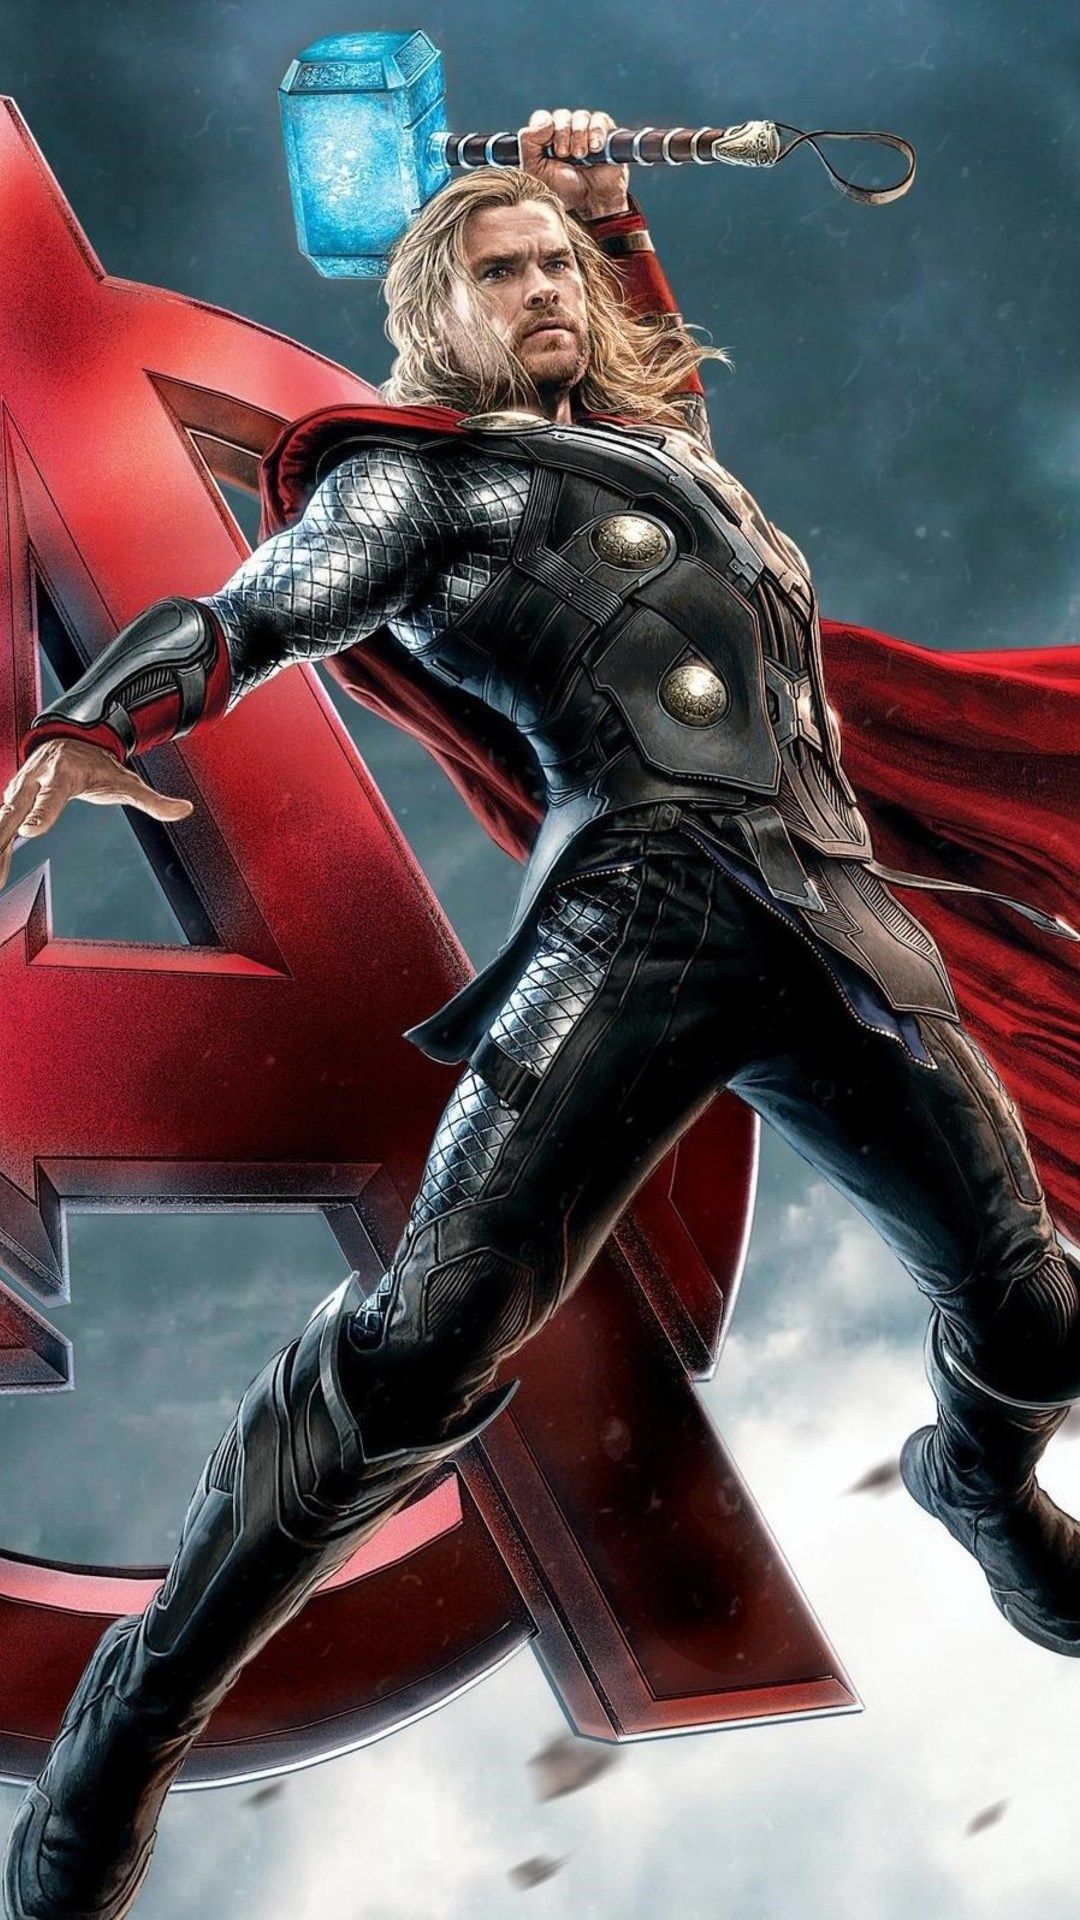 Thor Avengers htc one wallpaper, free and easy to download